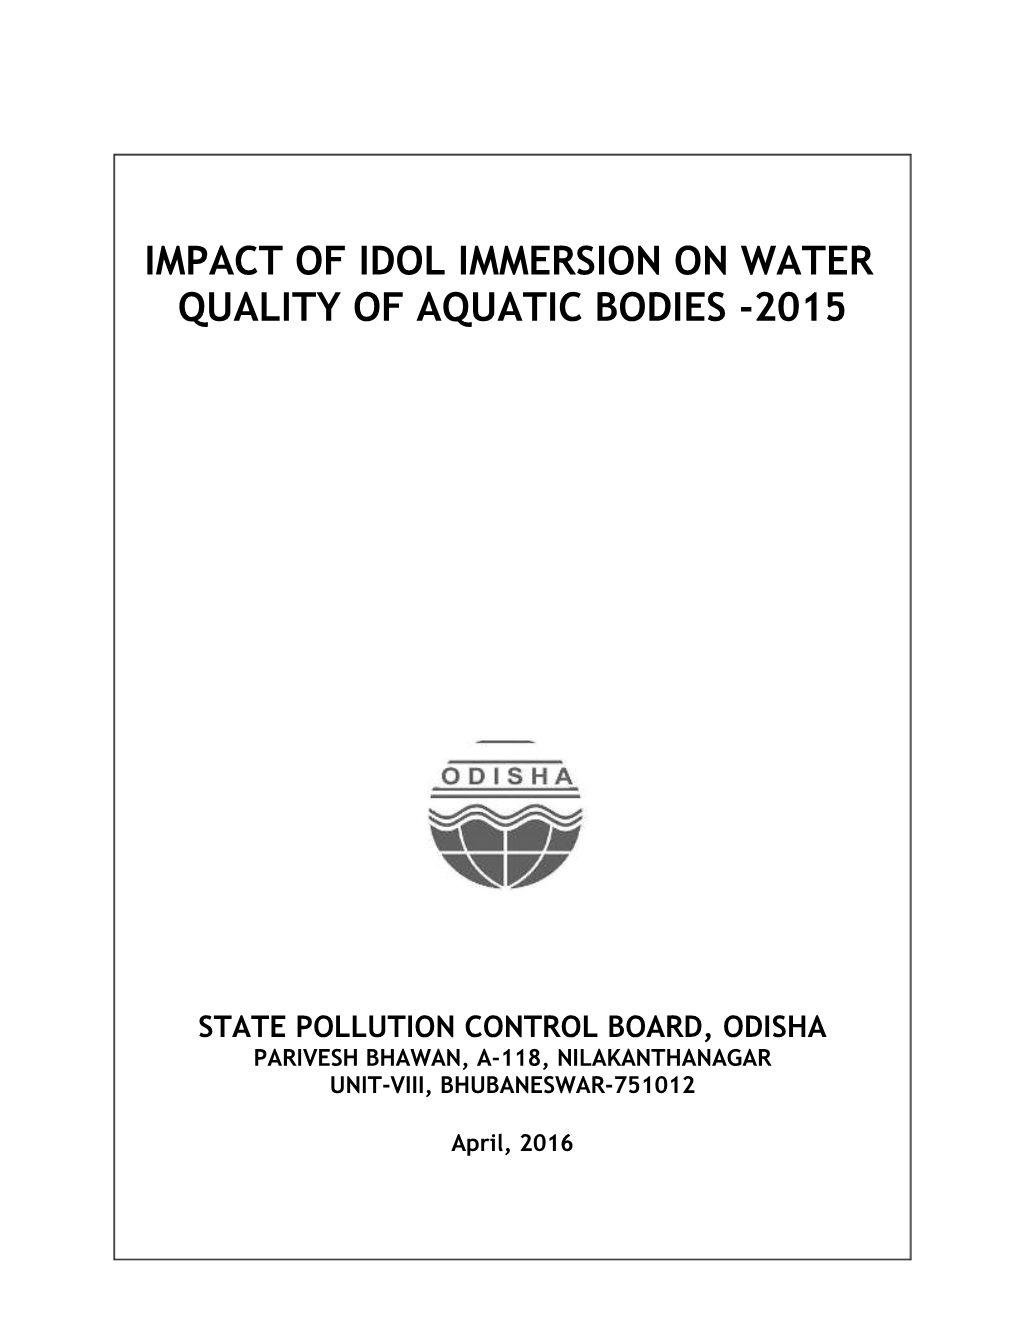 Impact of Idol Immersion on Water Quality of Aquatic Bodies -2015